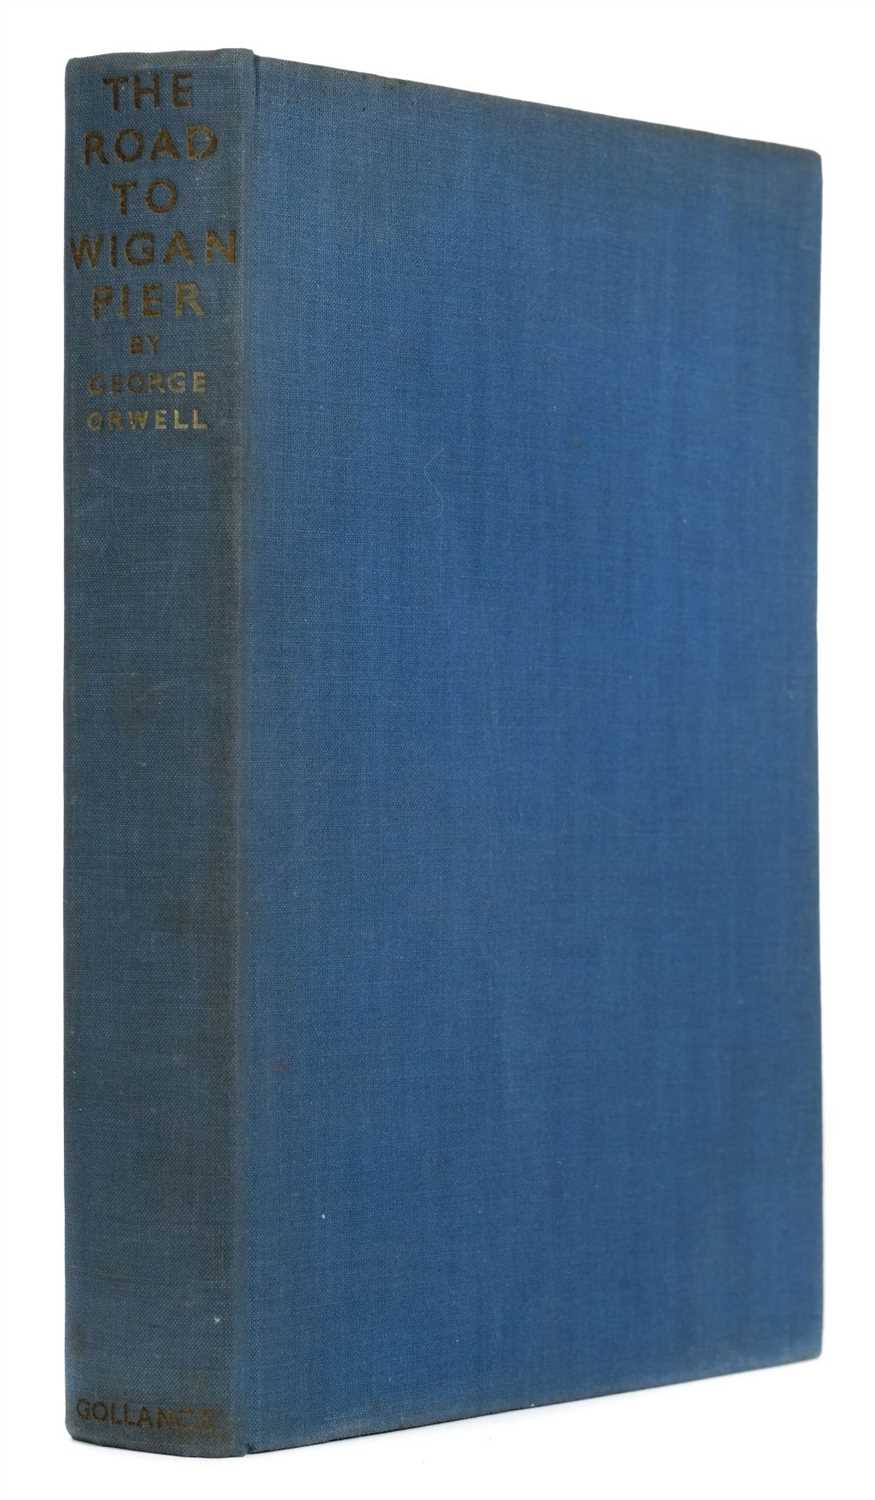 Lot 735 - Orwell (George). The Road to Wigan Pier, 1st edition, 1937